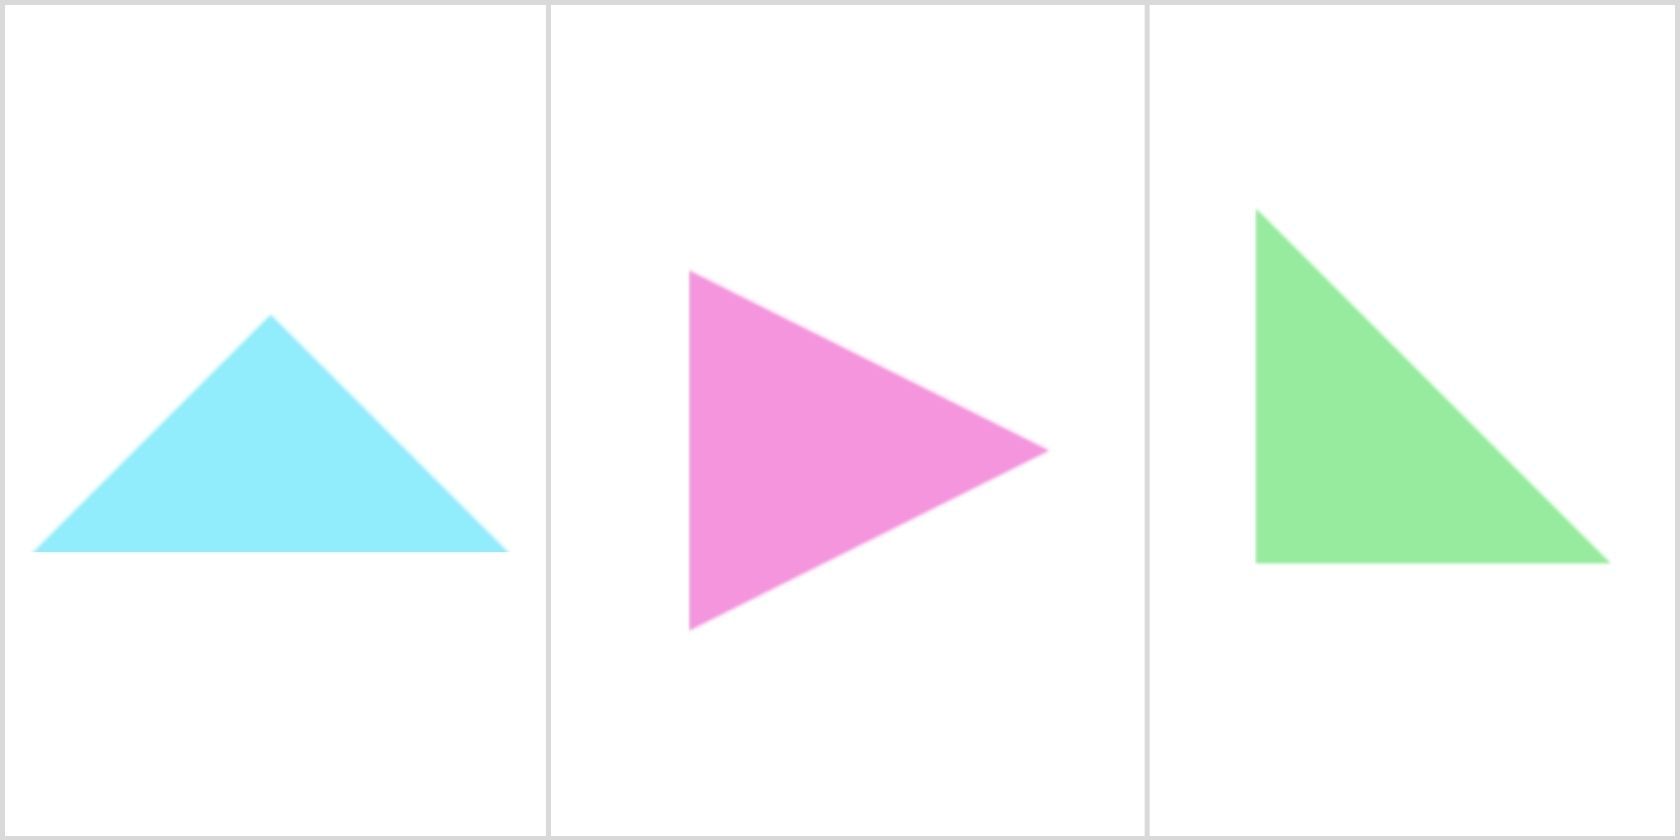 Different triangles  using CSS